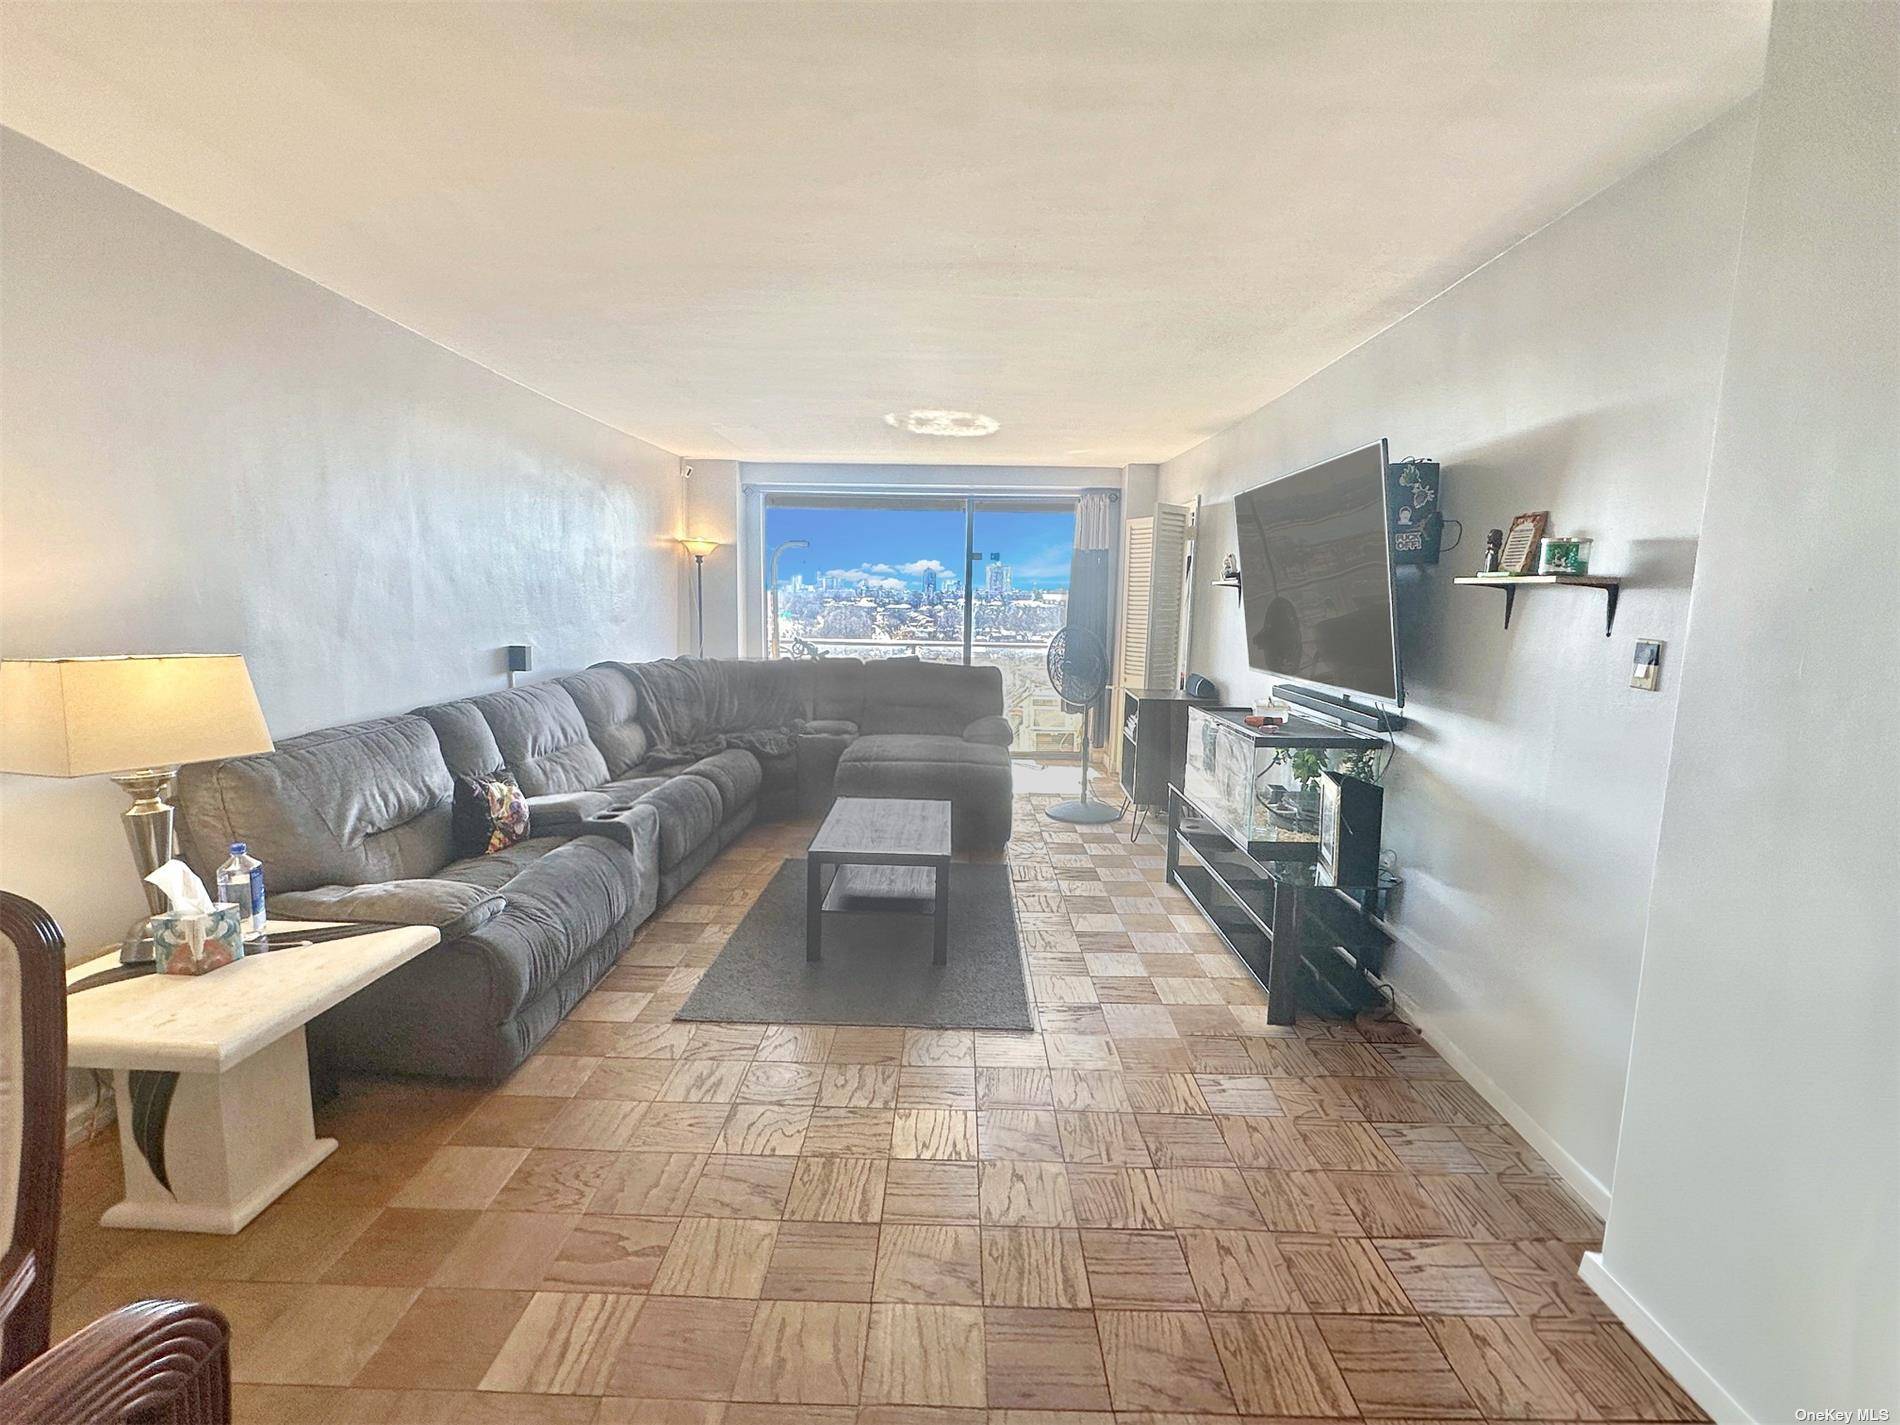 Luxurious Living 2 Bedroom Apartment Sale at 61 20 Grand Central Pkwy, Forest Hills, NY Are you dreaming of luxurious living in the heart of Forest Hills, NY ?